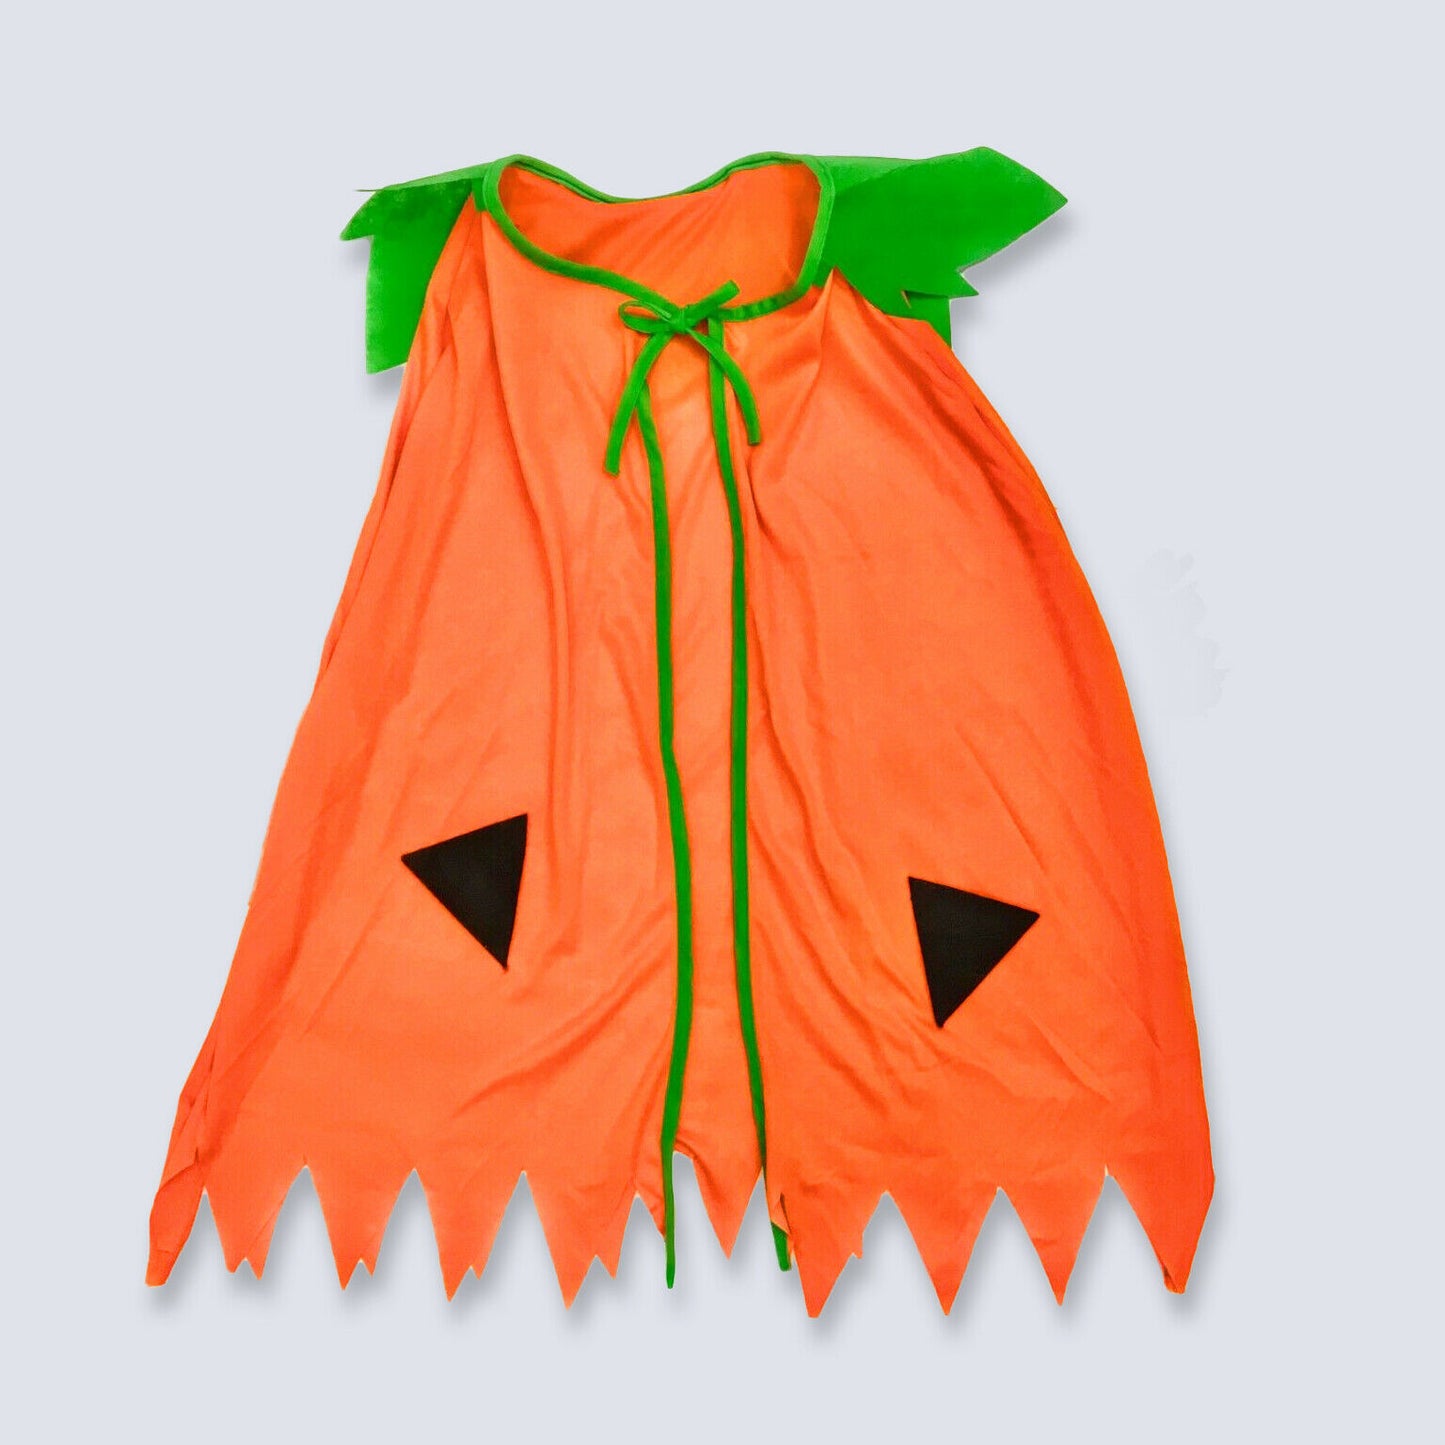 Kids 3 Set Halloween Witches Costume Pumpkin Trick or Treat Bag  Cape Witch Hat